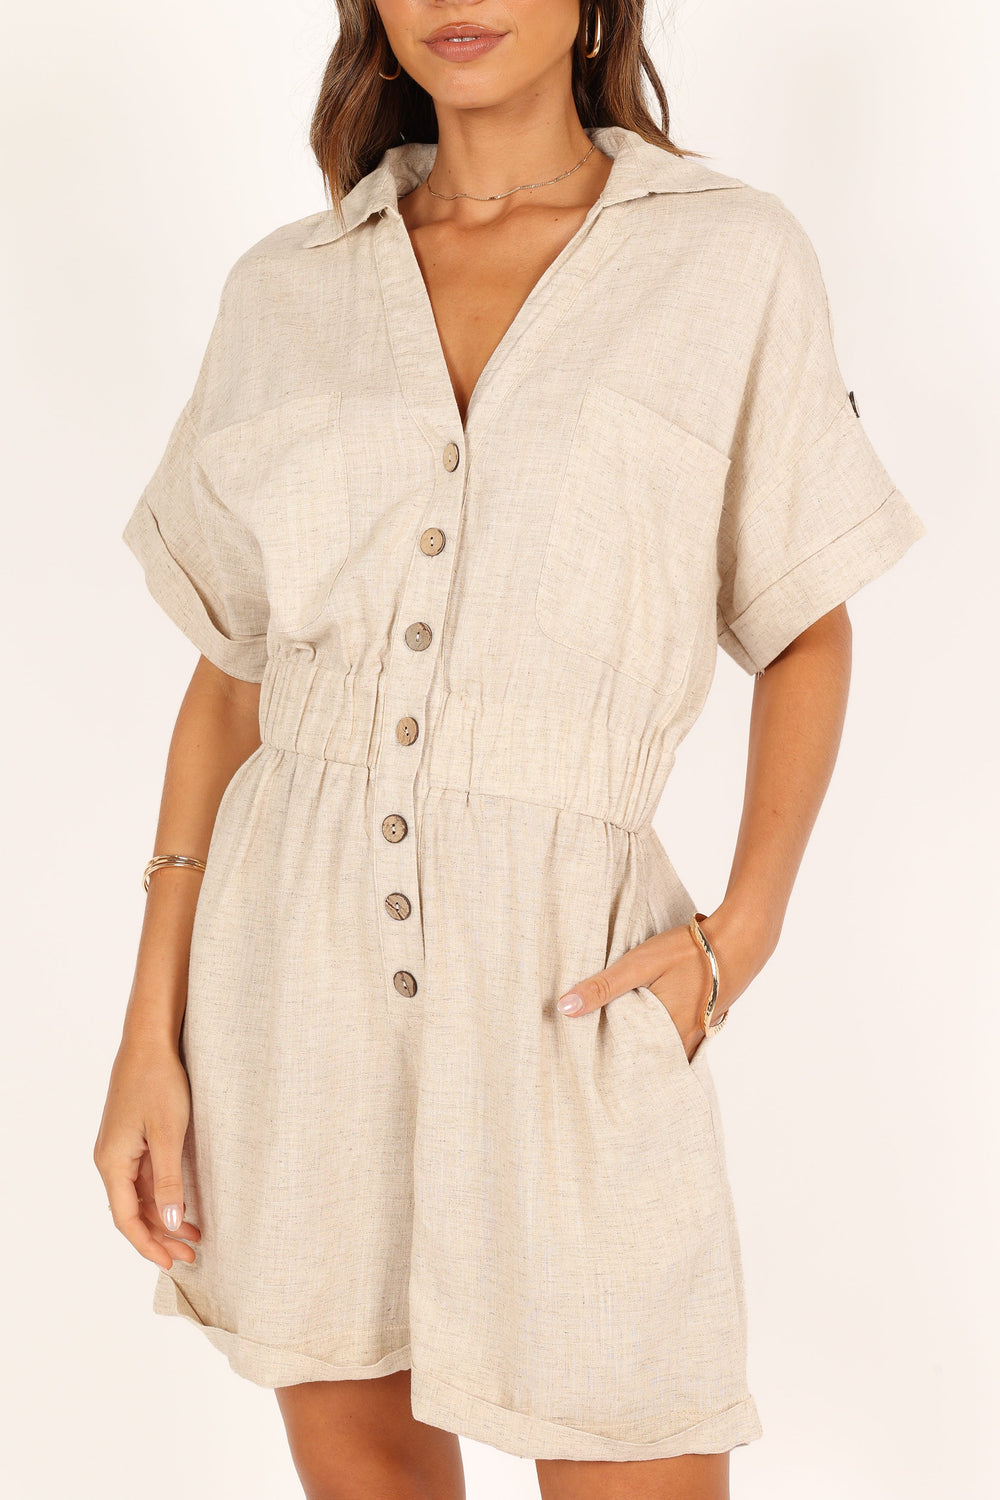 PLAYSUITS Lucy Linen Playsuit - Oatmeal